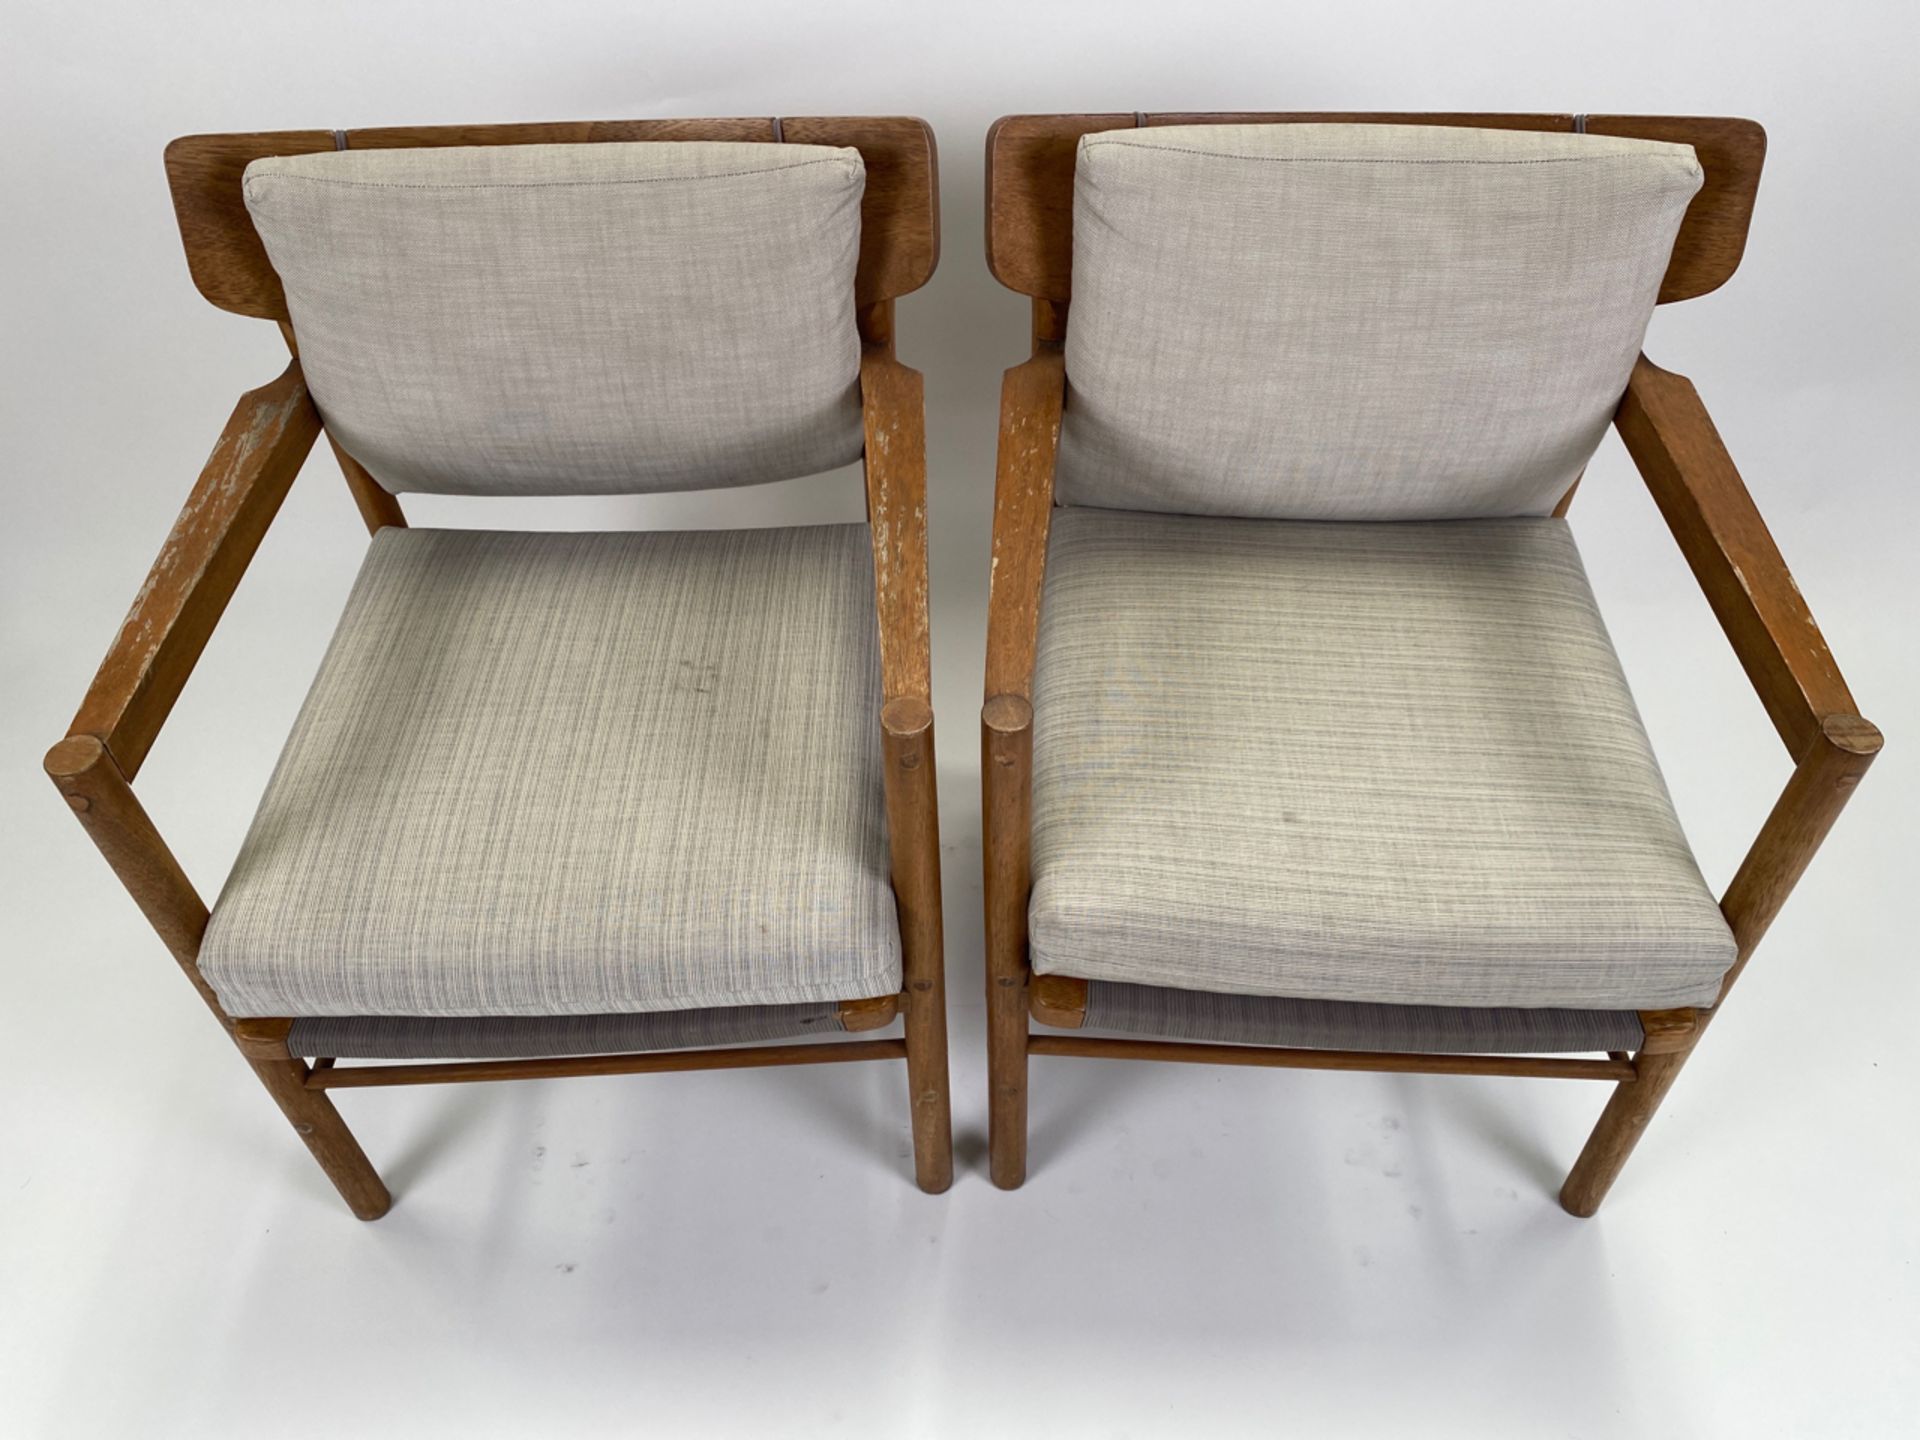 Pair of Tribu Style Garden Chairs - Image 2 of 2